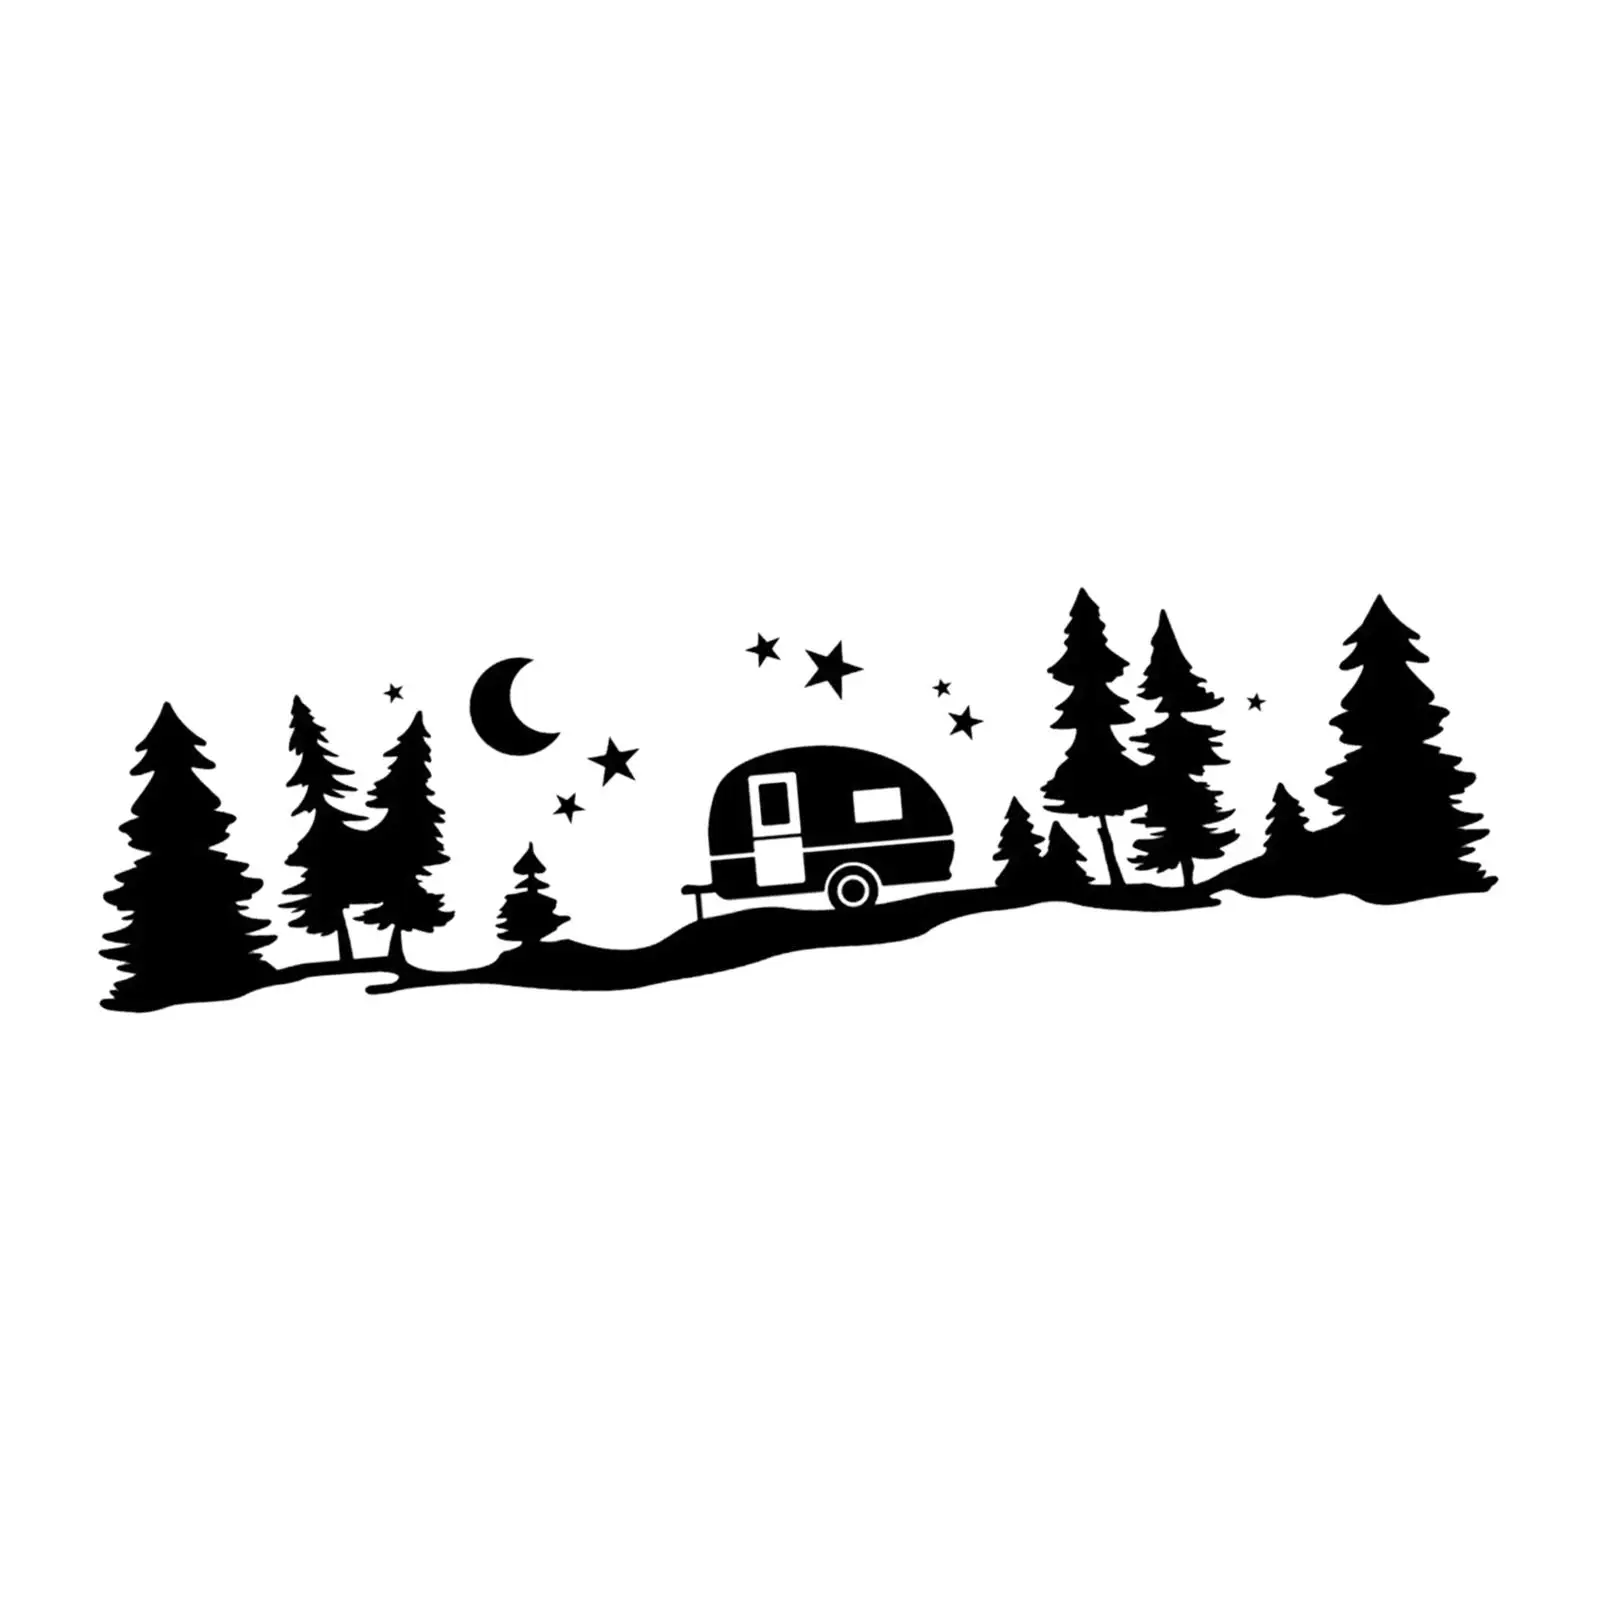 Car Side Body Decal Christmas Graphic Vehicle Accessories for Truck Van